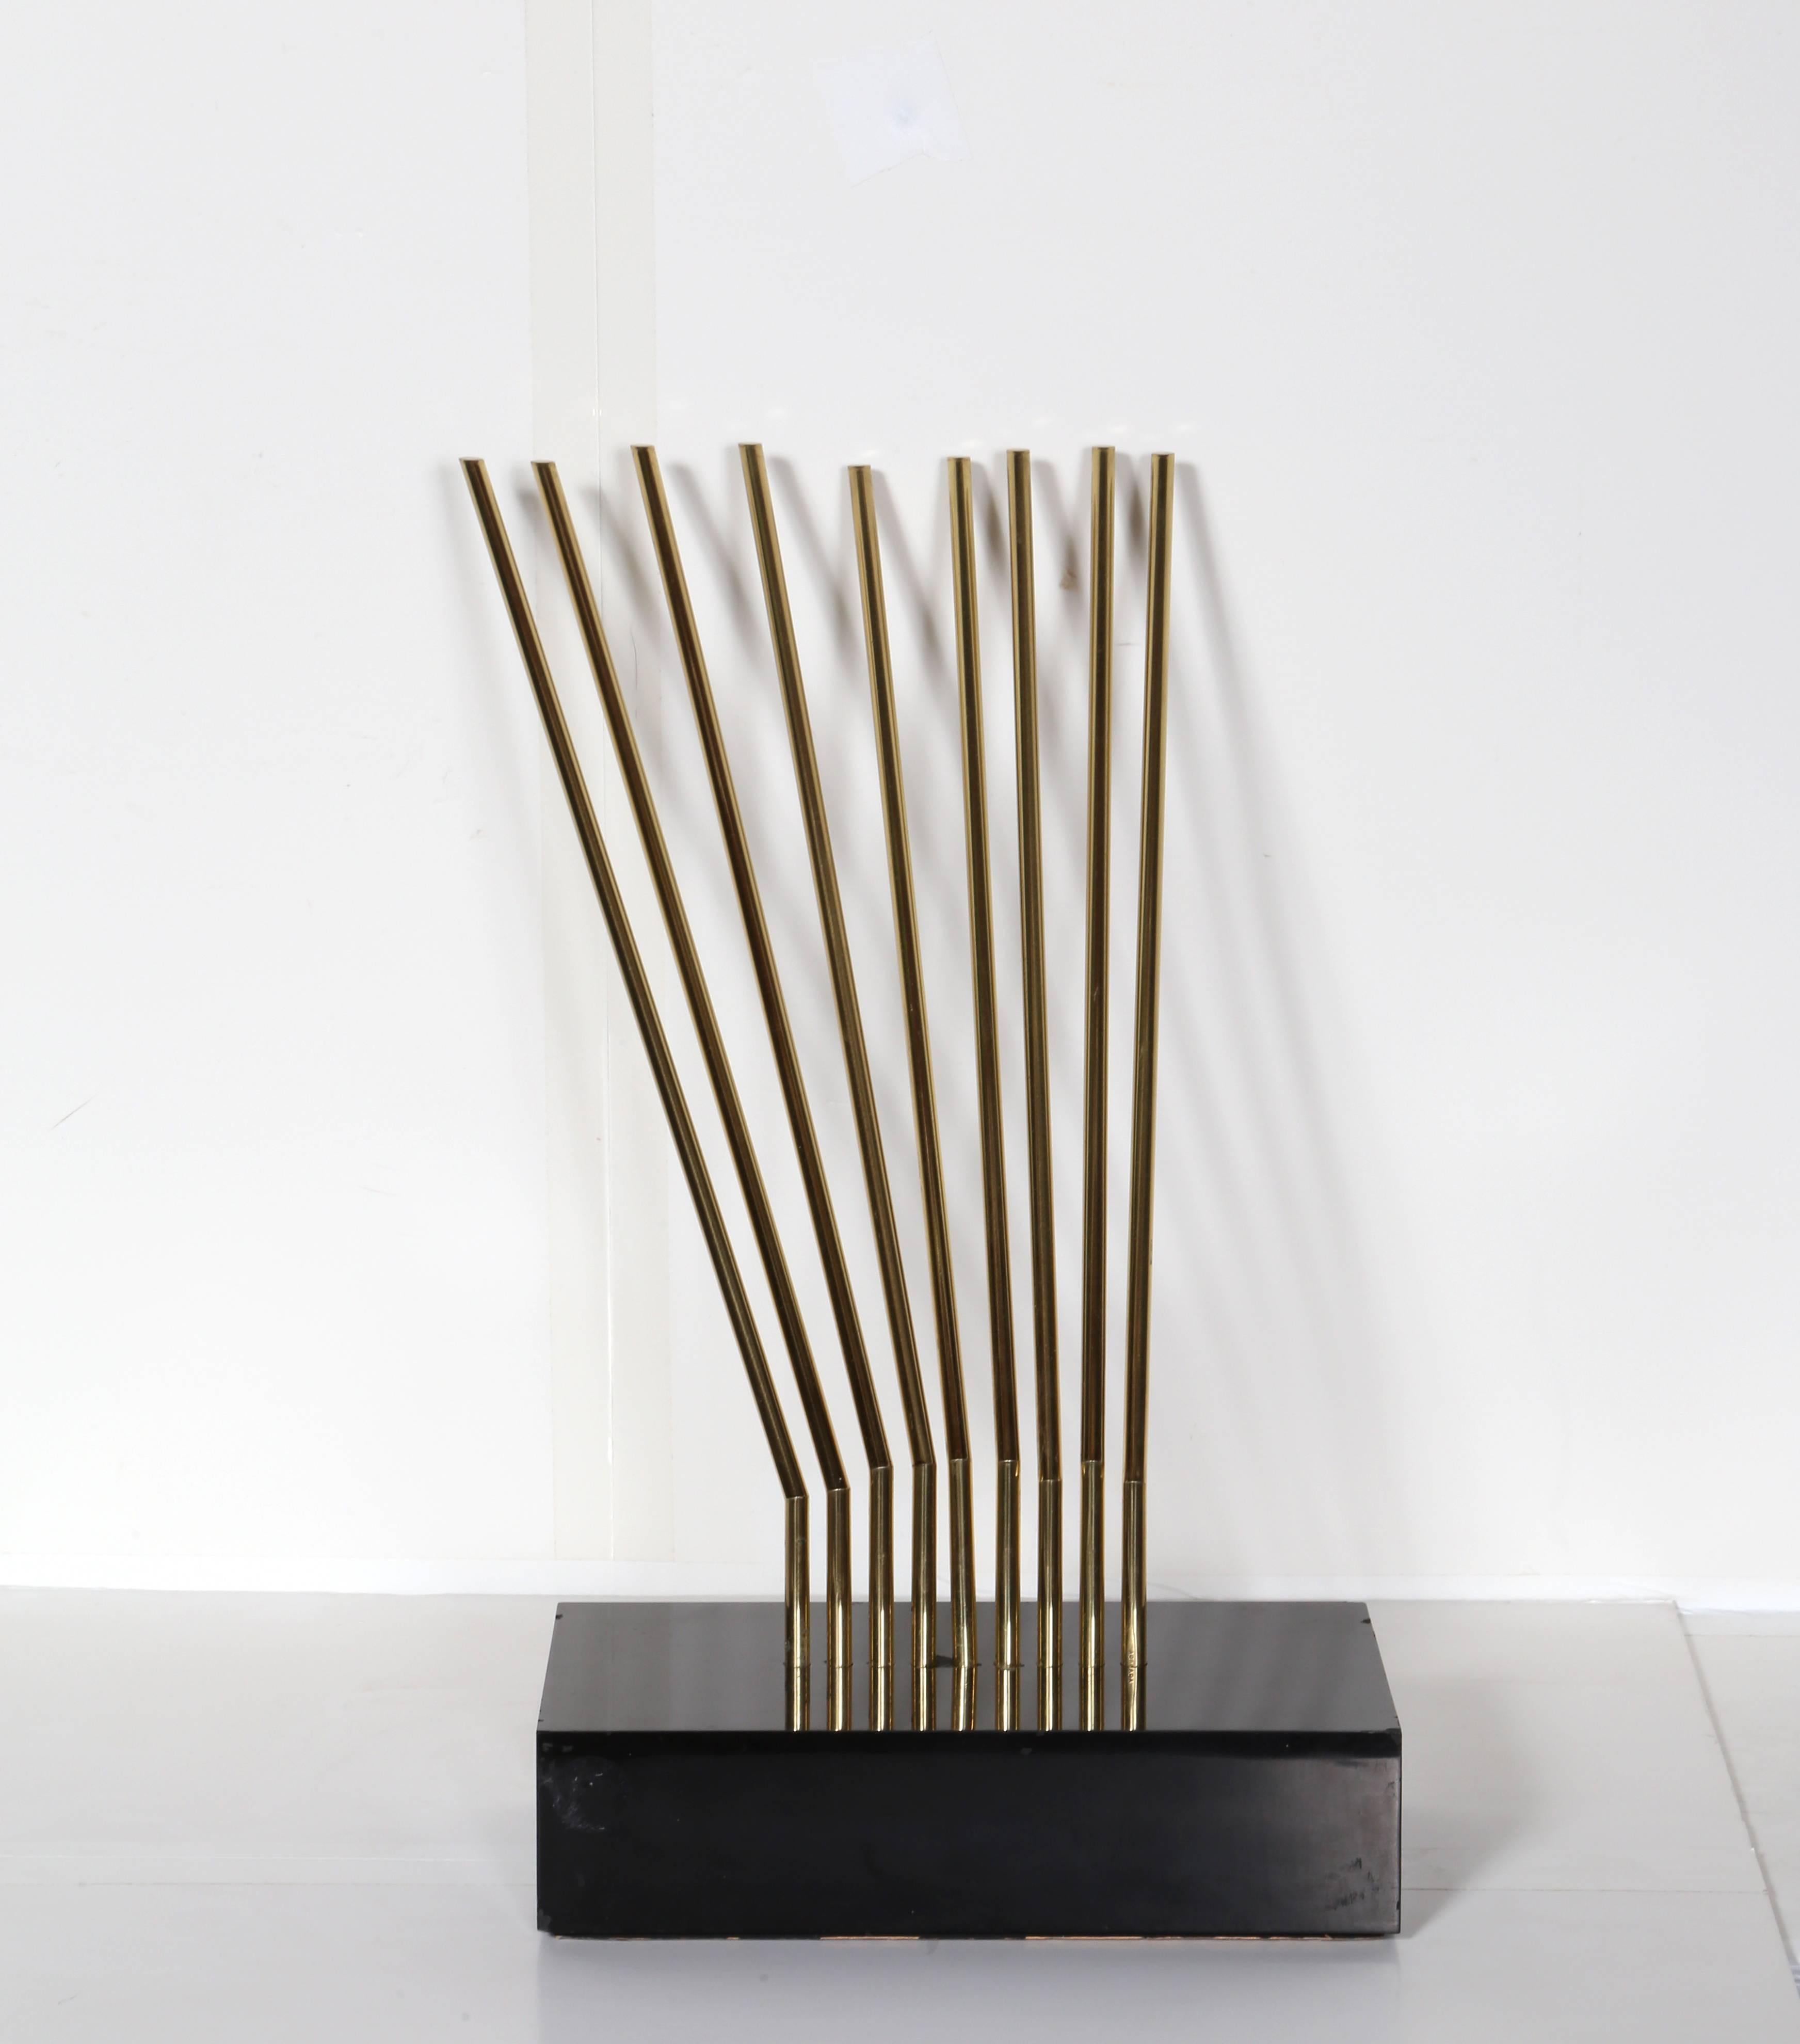 In all Directions (Toutes Directions) - Sculpture by Yaacov Agam